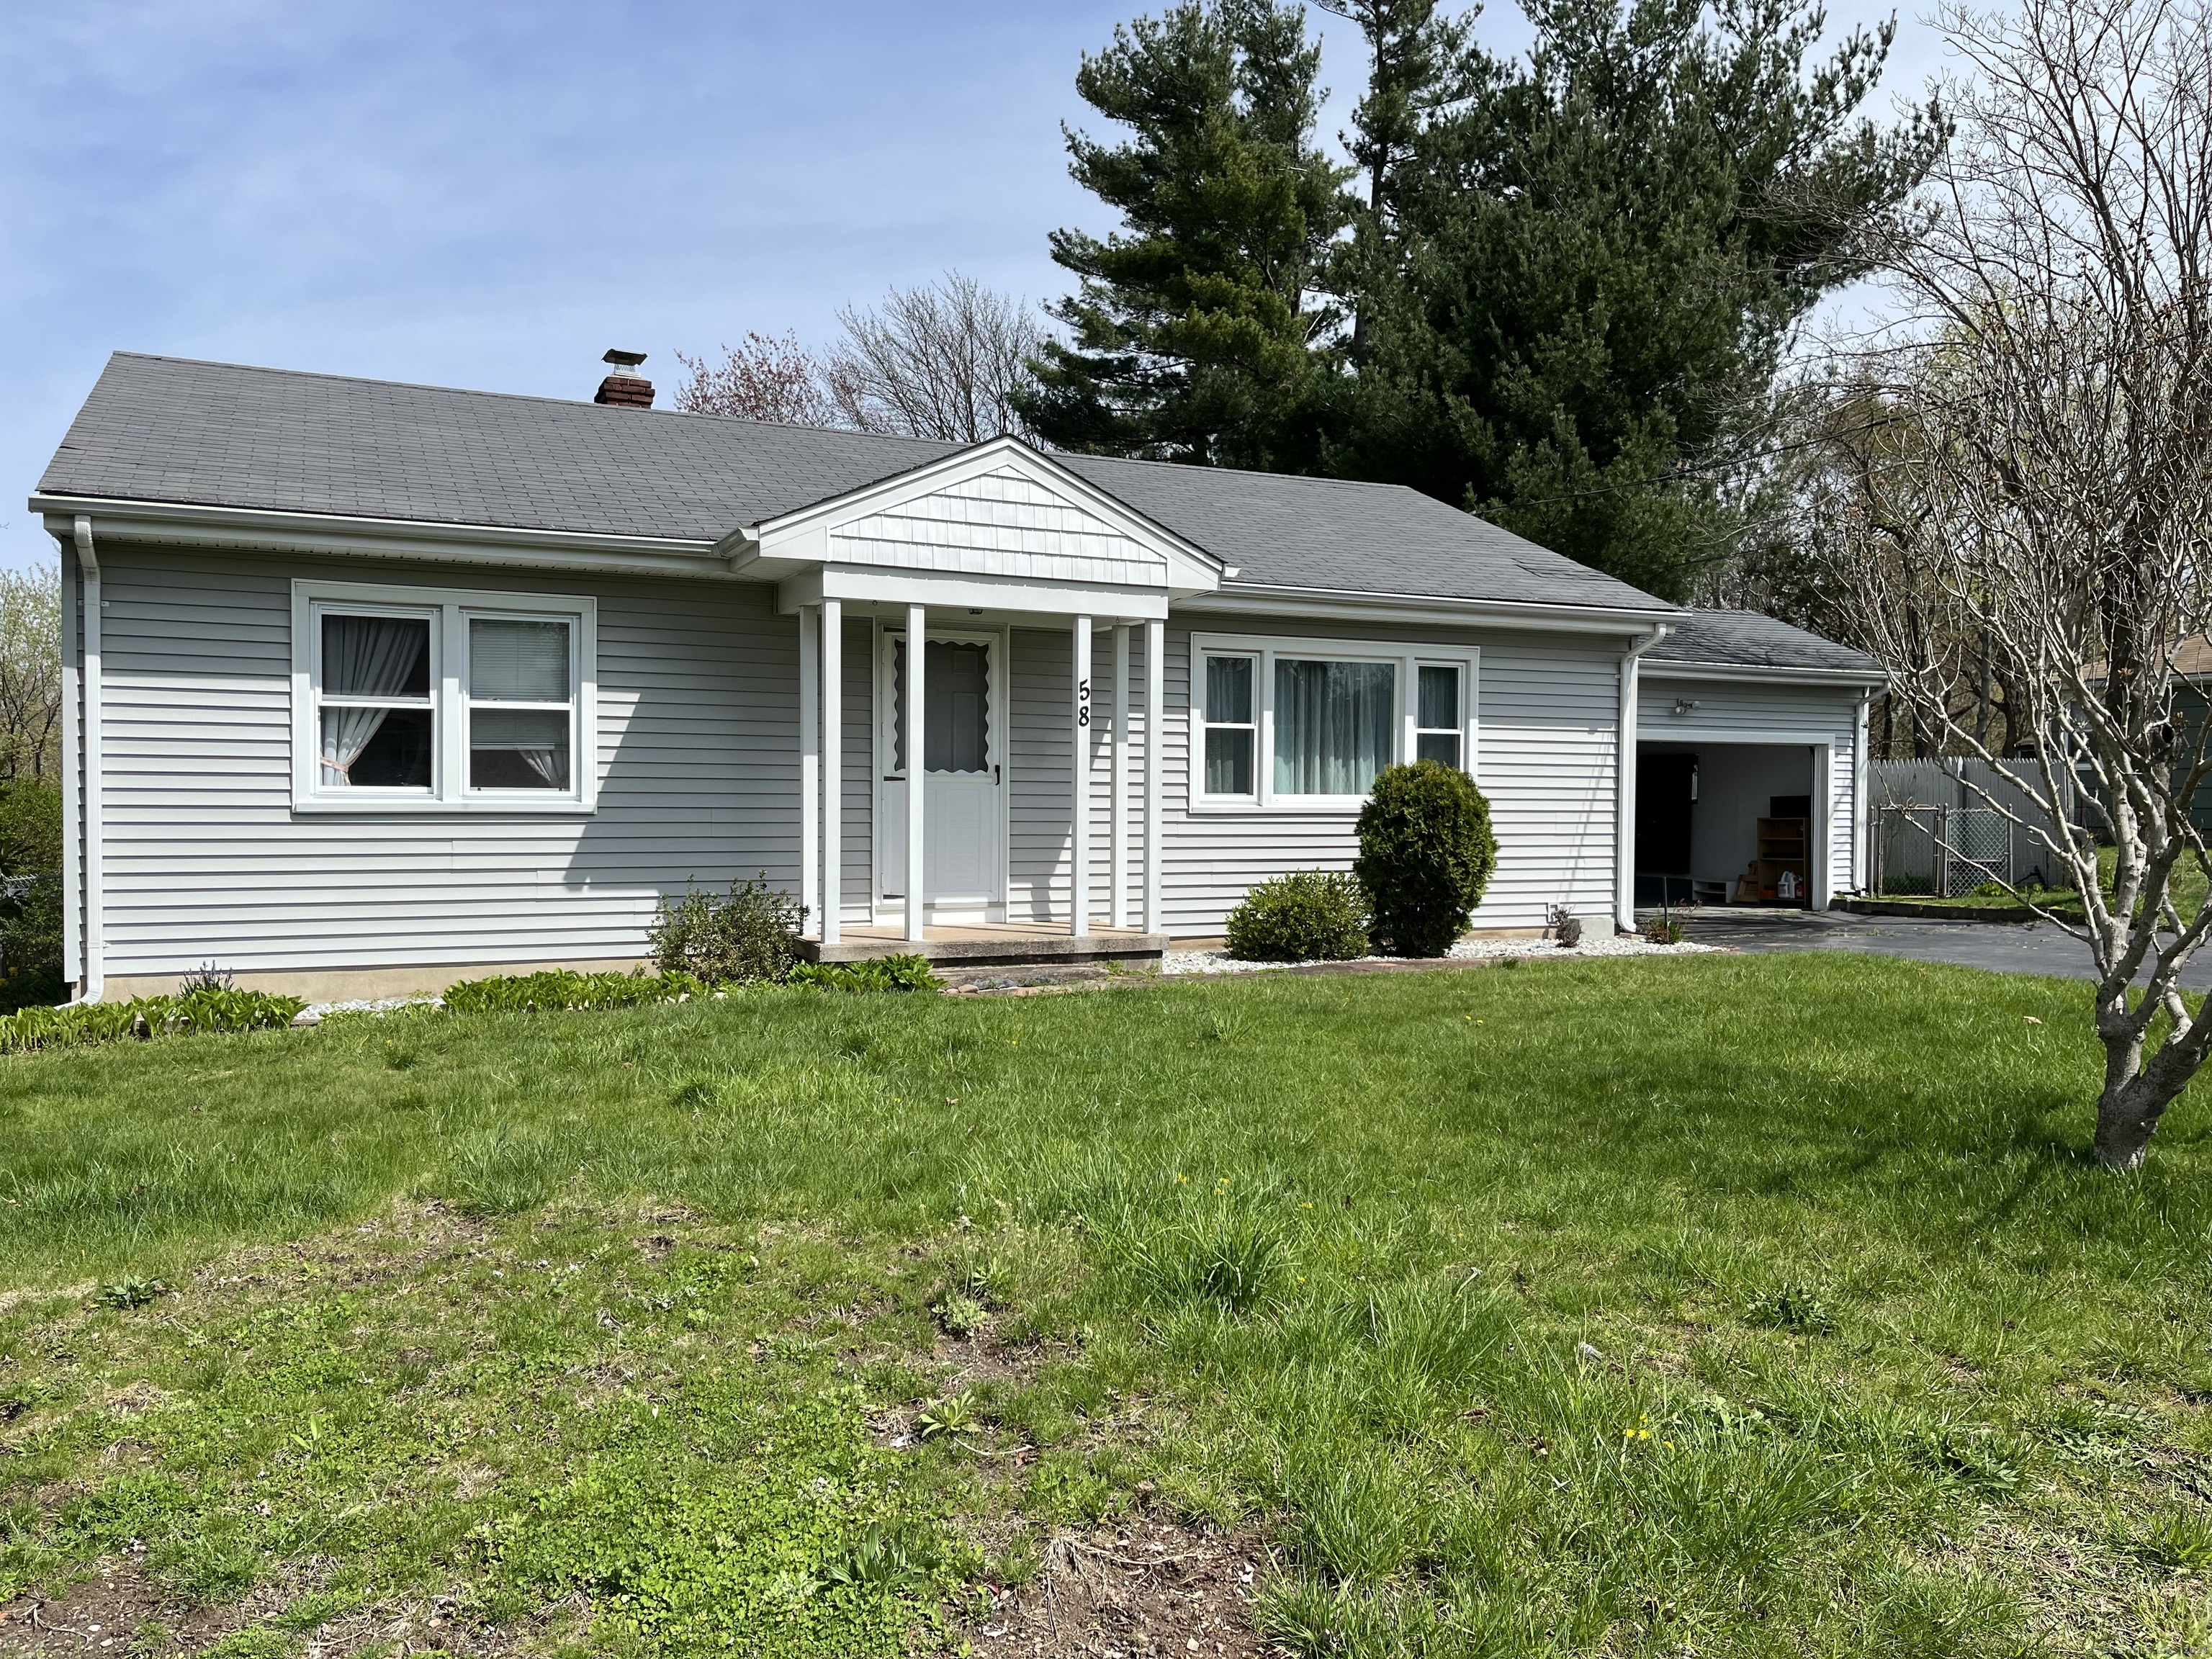 58 E Side Drive, Wallingford, Connecticut - 2 Bedrooms  
1 Bathrooms  
5 Rooms - 